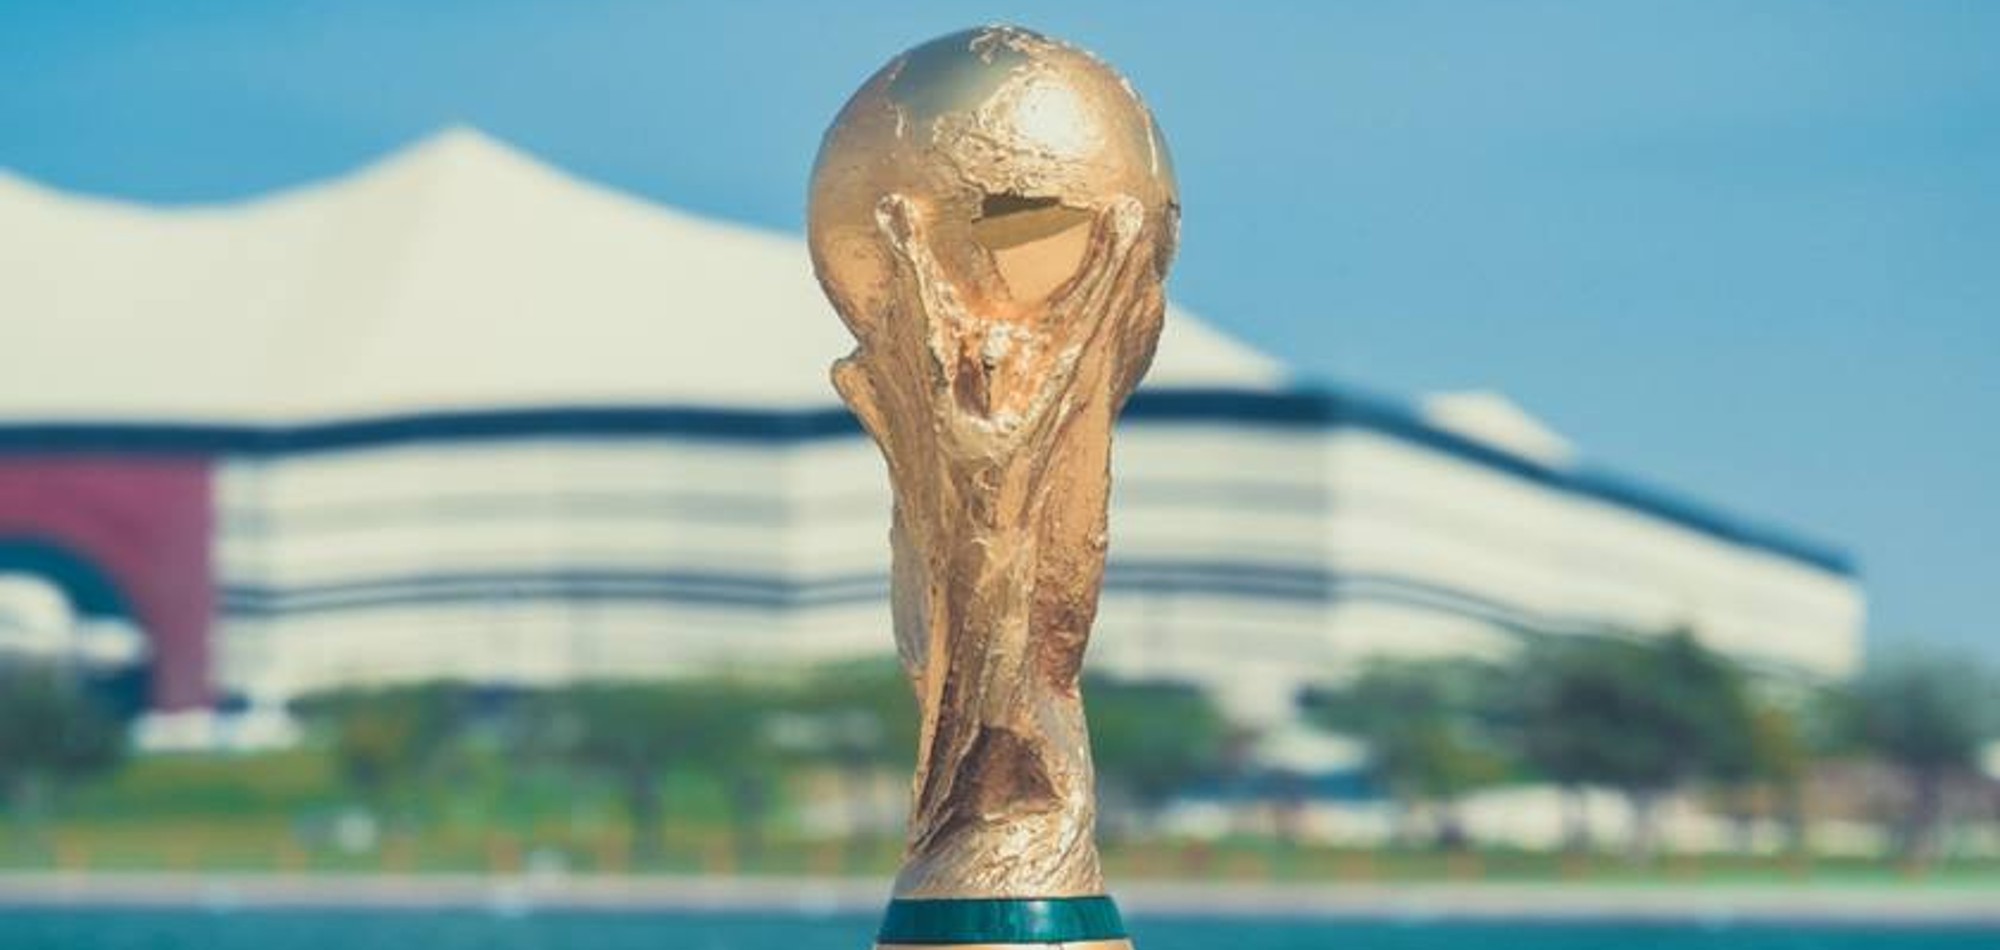 FIFA World Cup 2022 Sales and Marketing Director: Sales Phase is Golden Opportunity for Ticket Purchases